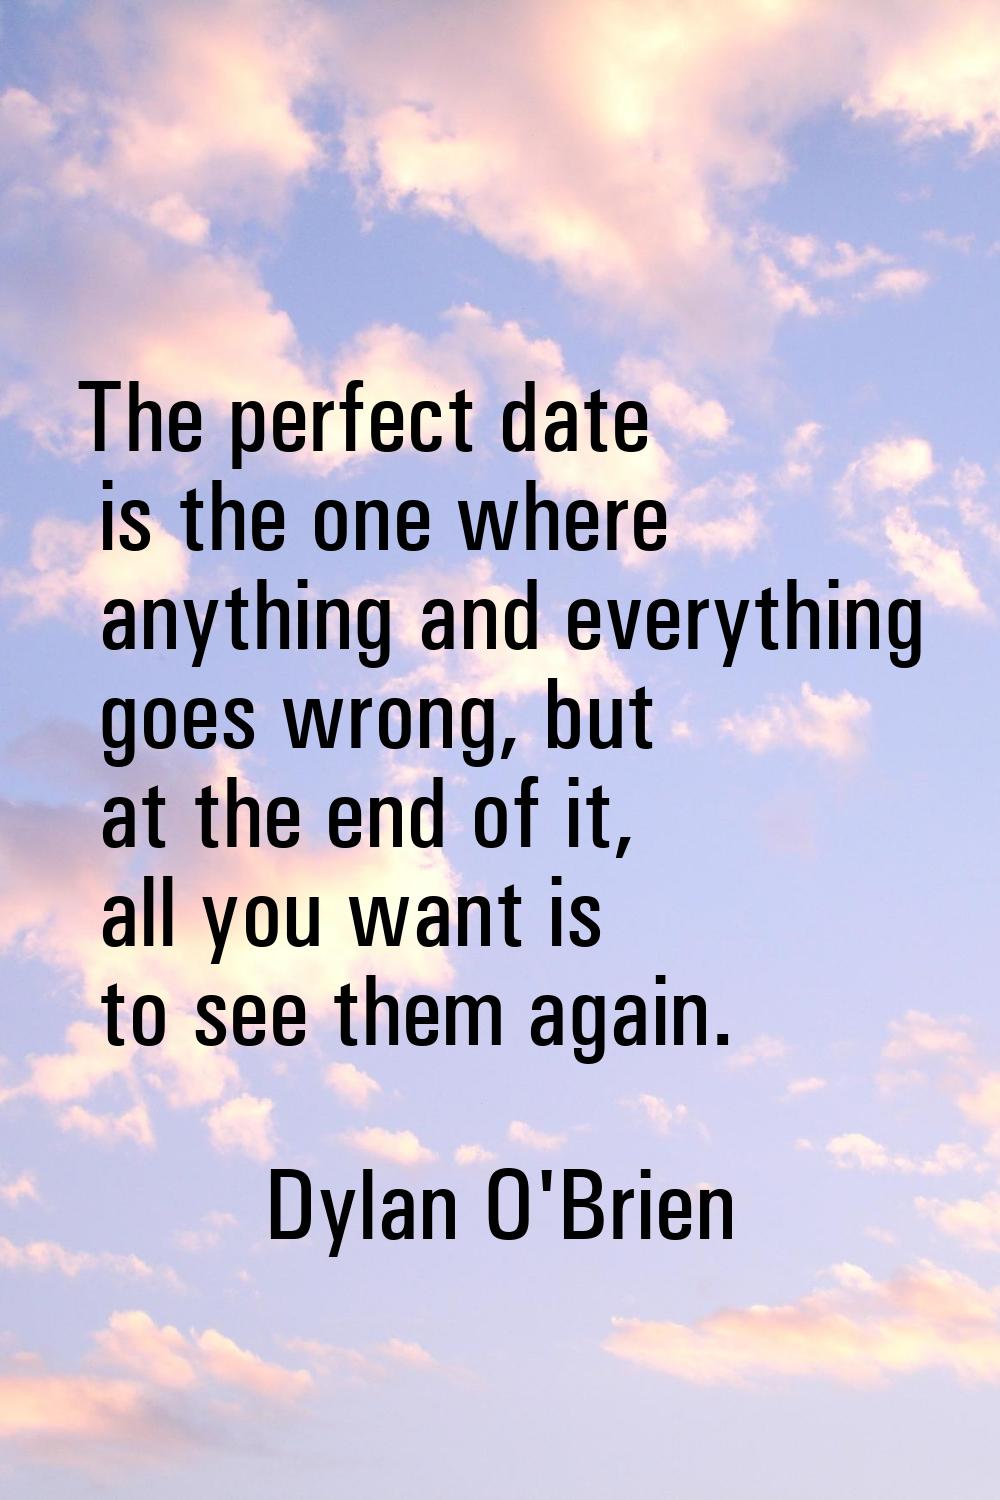 The perfect date is the one where anything and everything goes wrong, but at the end of it, all you